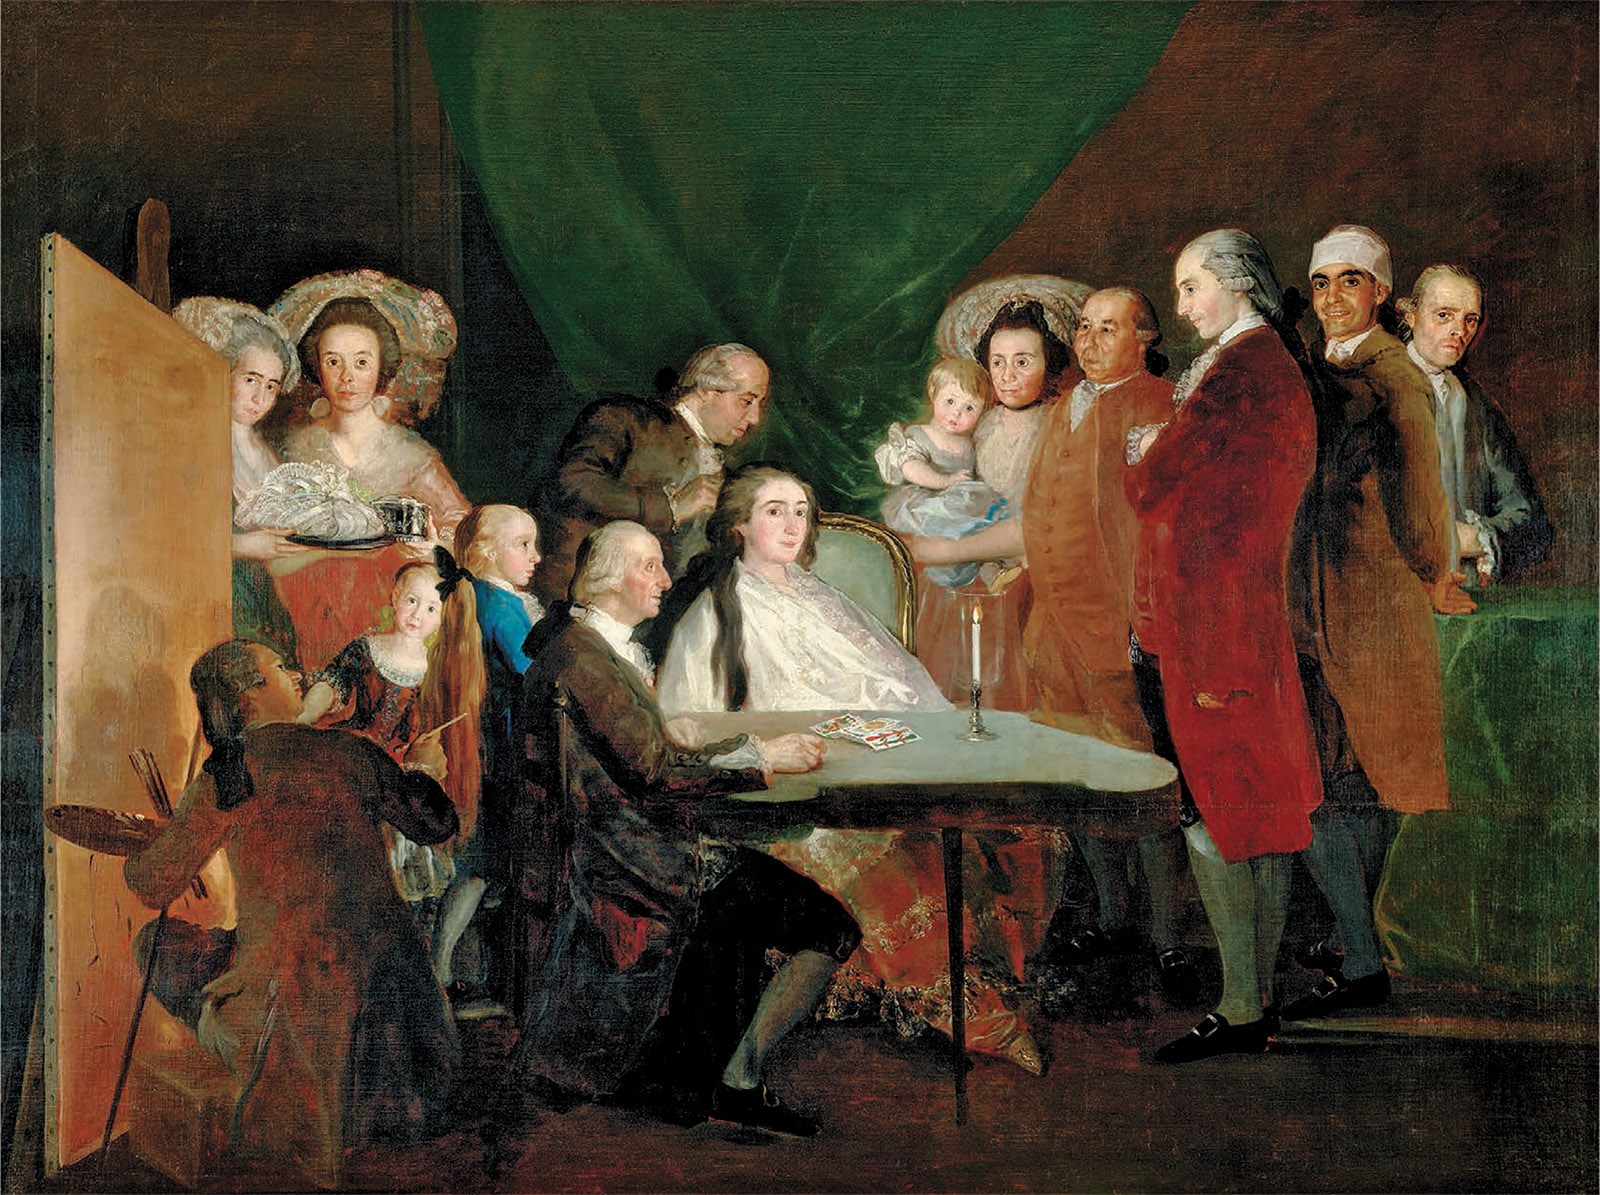 The Family of the Infante don Luis de Borbón; painting by Francisco Goya